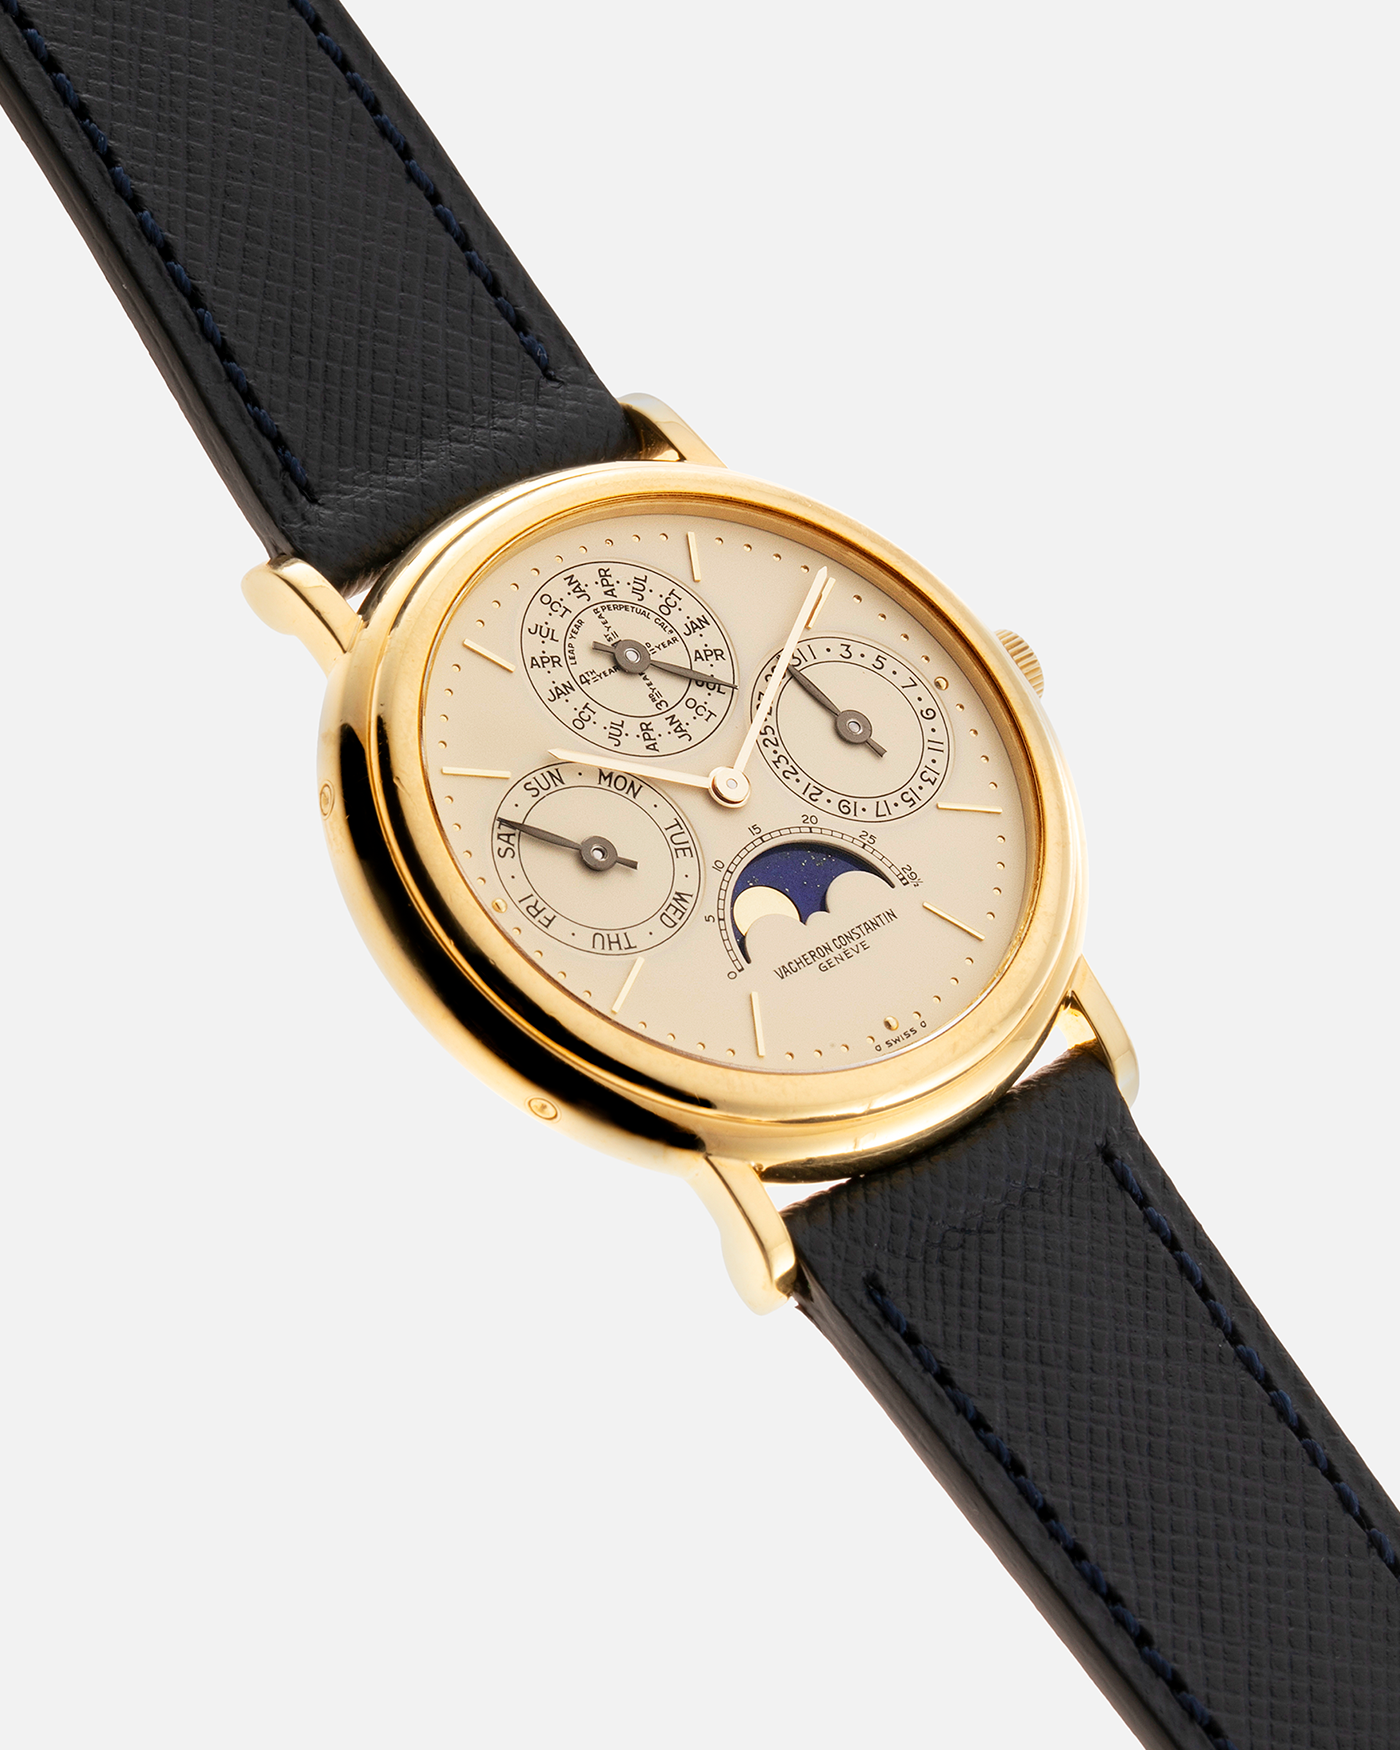 Brand: Vacheron Constantin Year: 1980’s / 1990’s Model: Perpetual Calendar Reference Number: 43031 Material: 18k Yellow Gold Movement: Vacheron Constantin Cal. 1120/2 Case Diameter: 36mm Bracelet: Molequin Navy Blue Texture Calf and Vacheron Constantin Brown Alligator with 18k Yellow Gold Tang Buckle